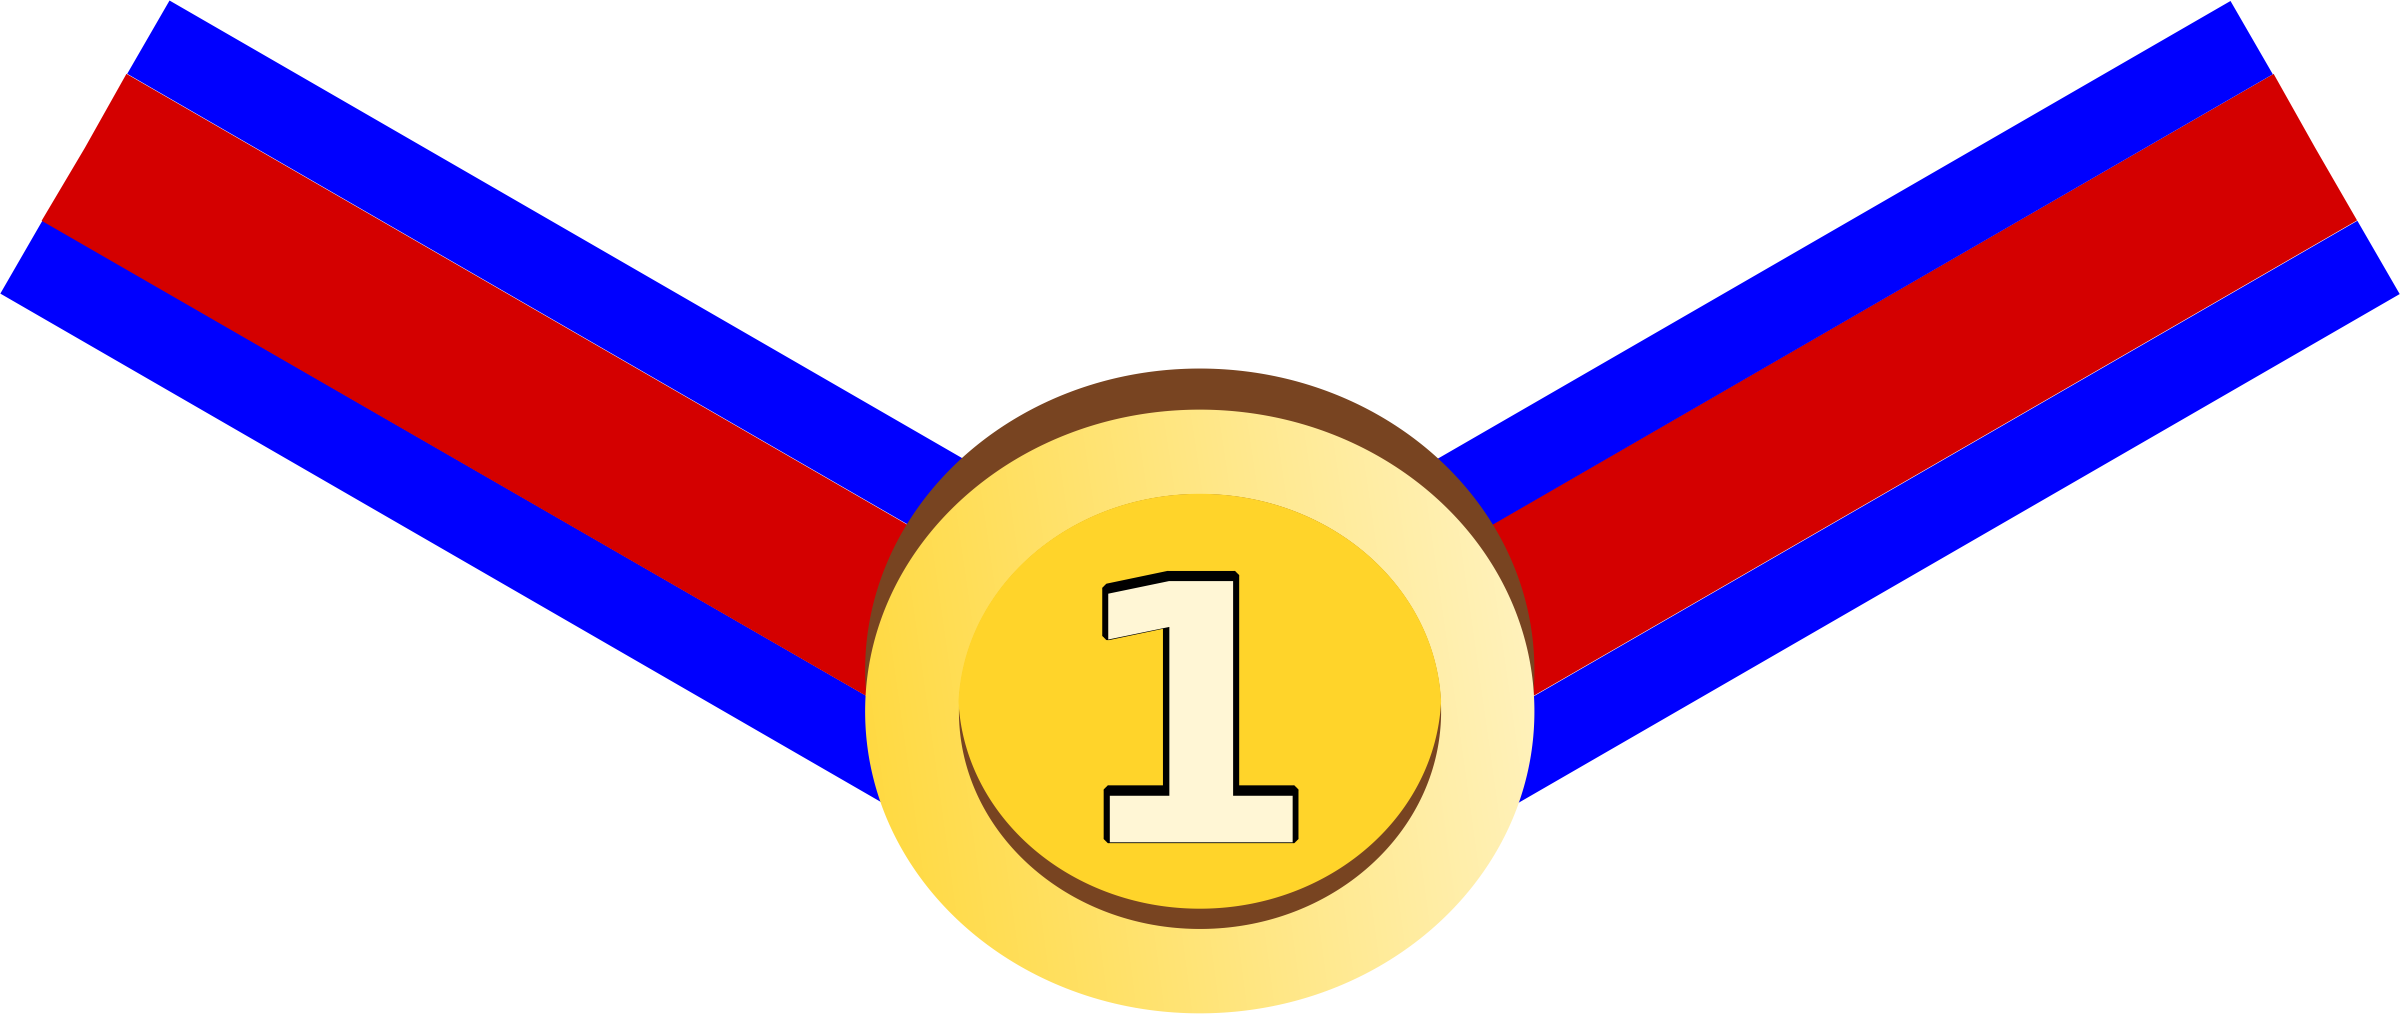 medals clipart - photo #46